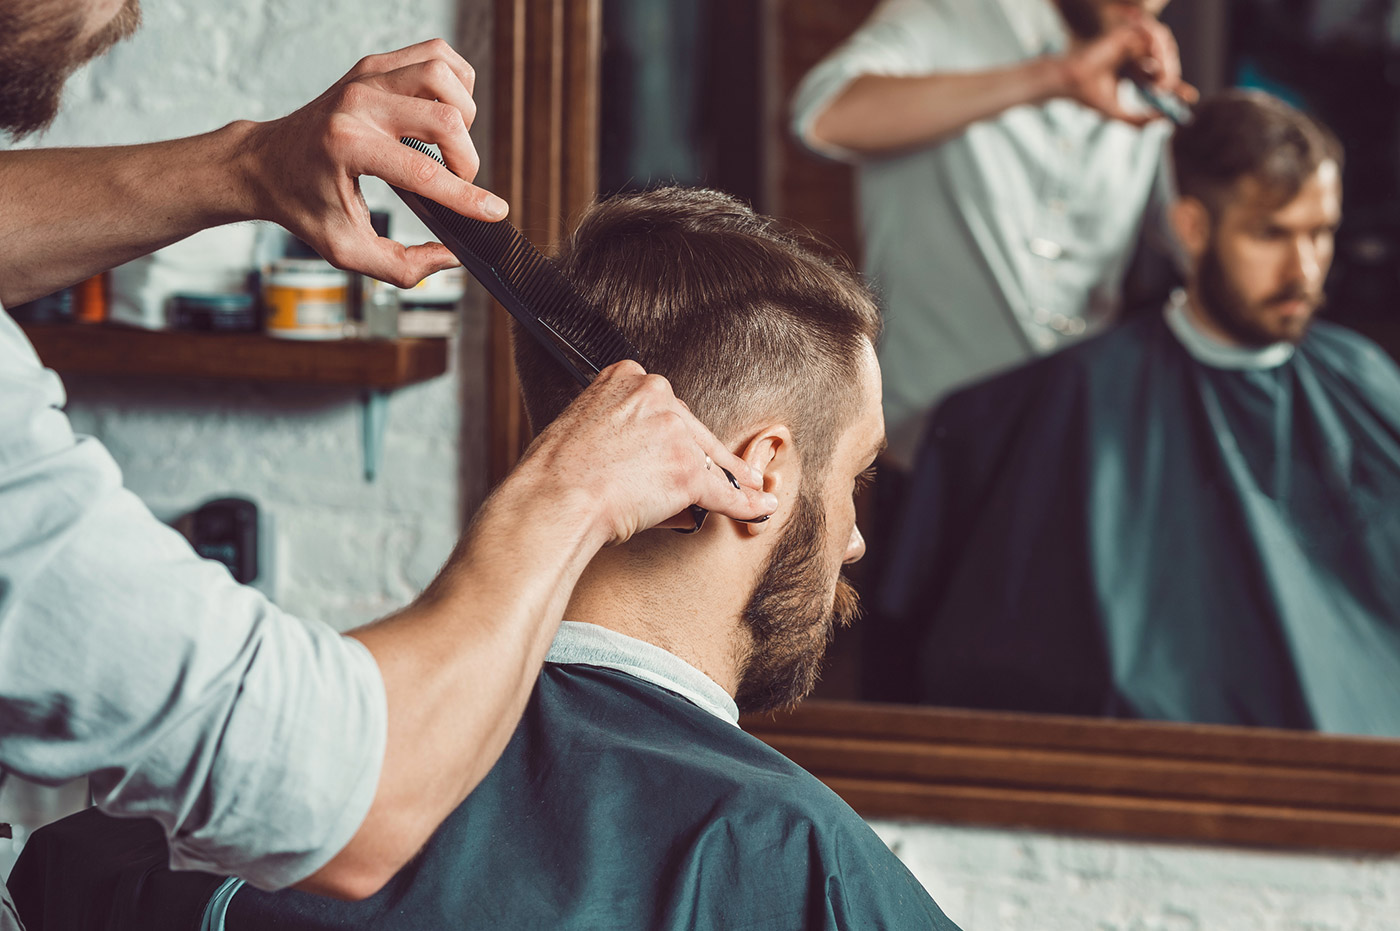 A young man getting his hair cut.